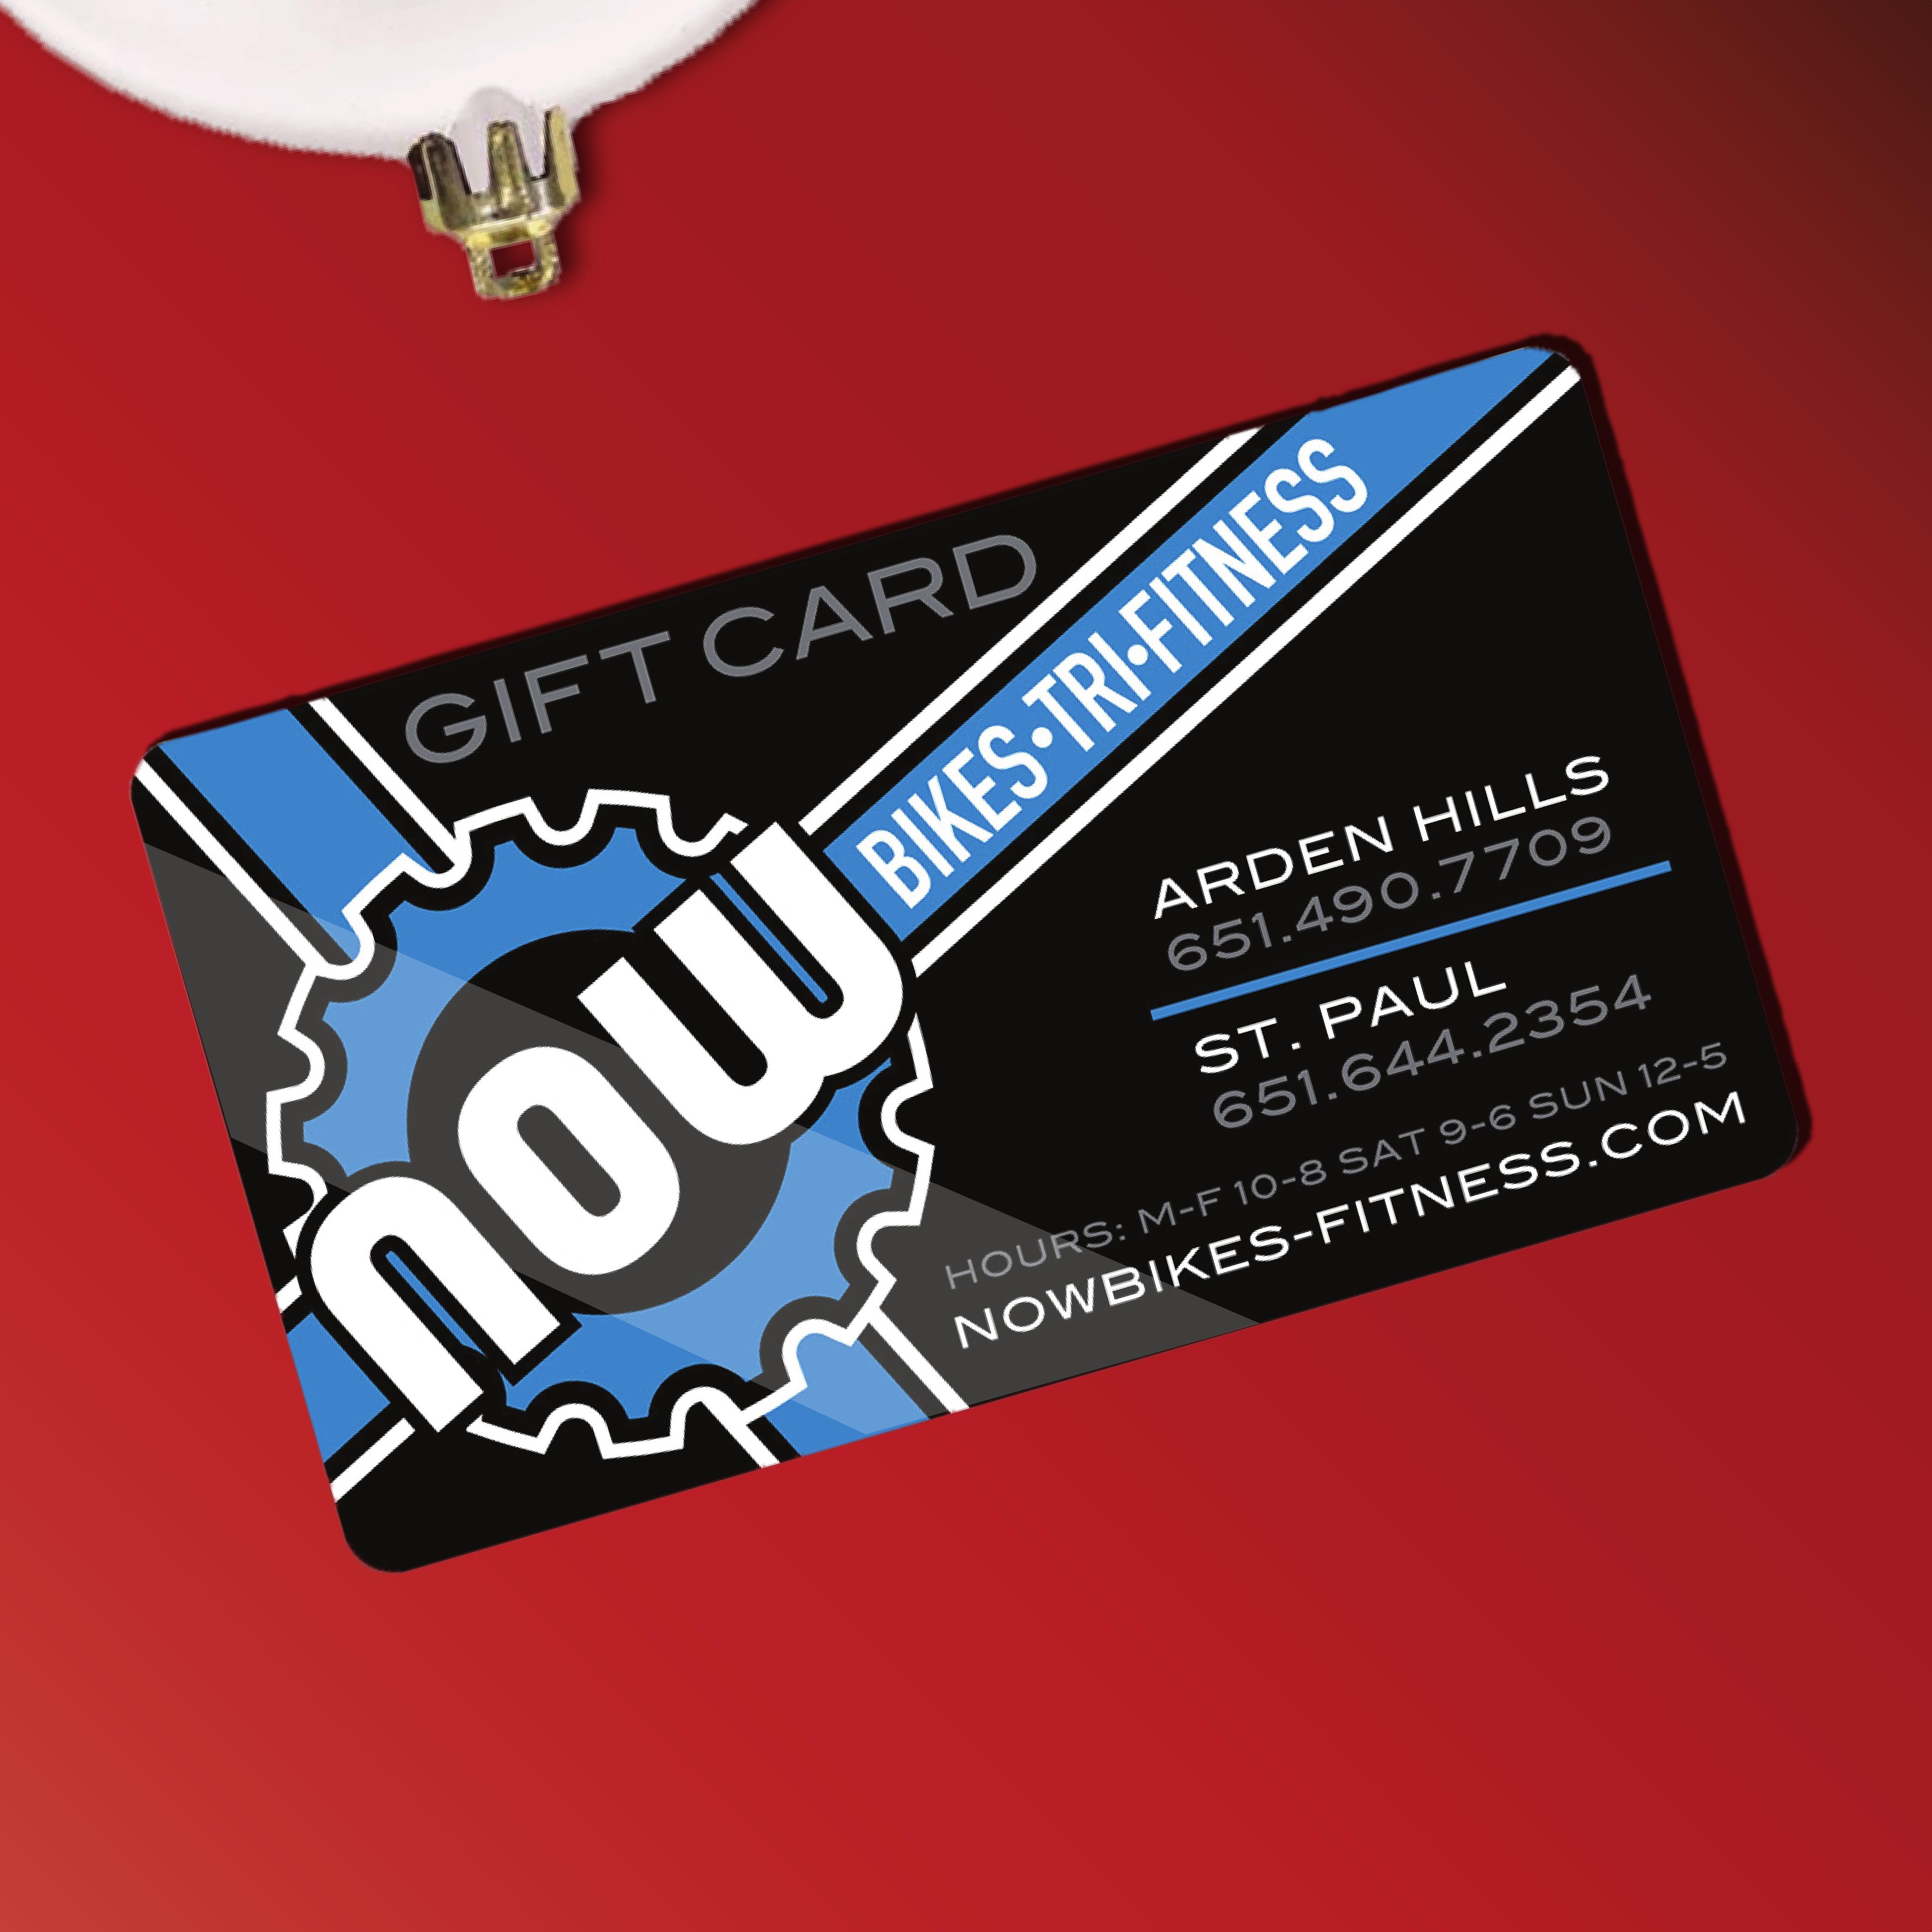 Now Bikes Gift Card